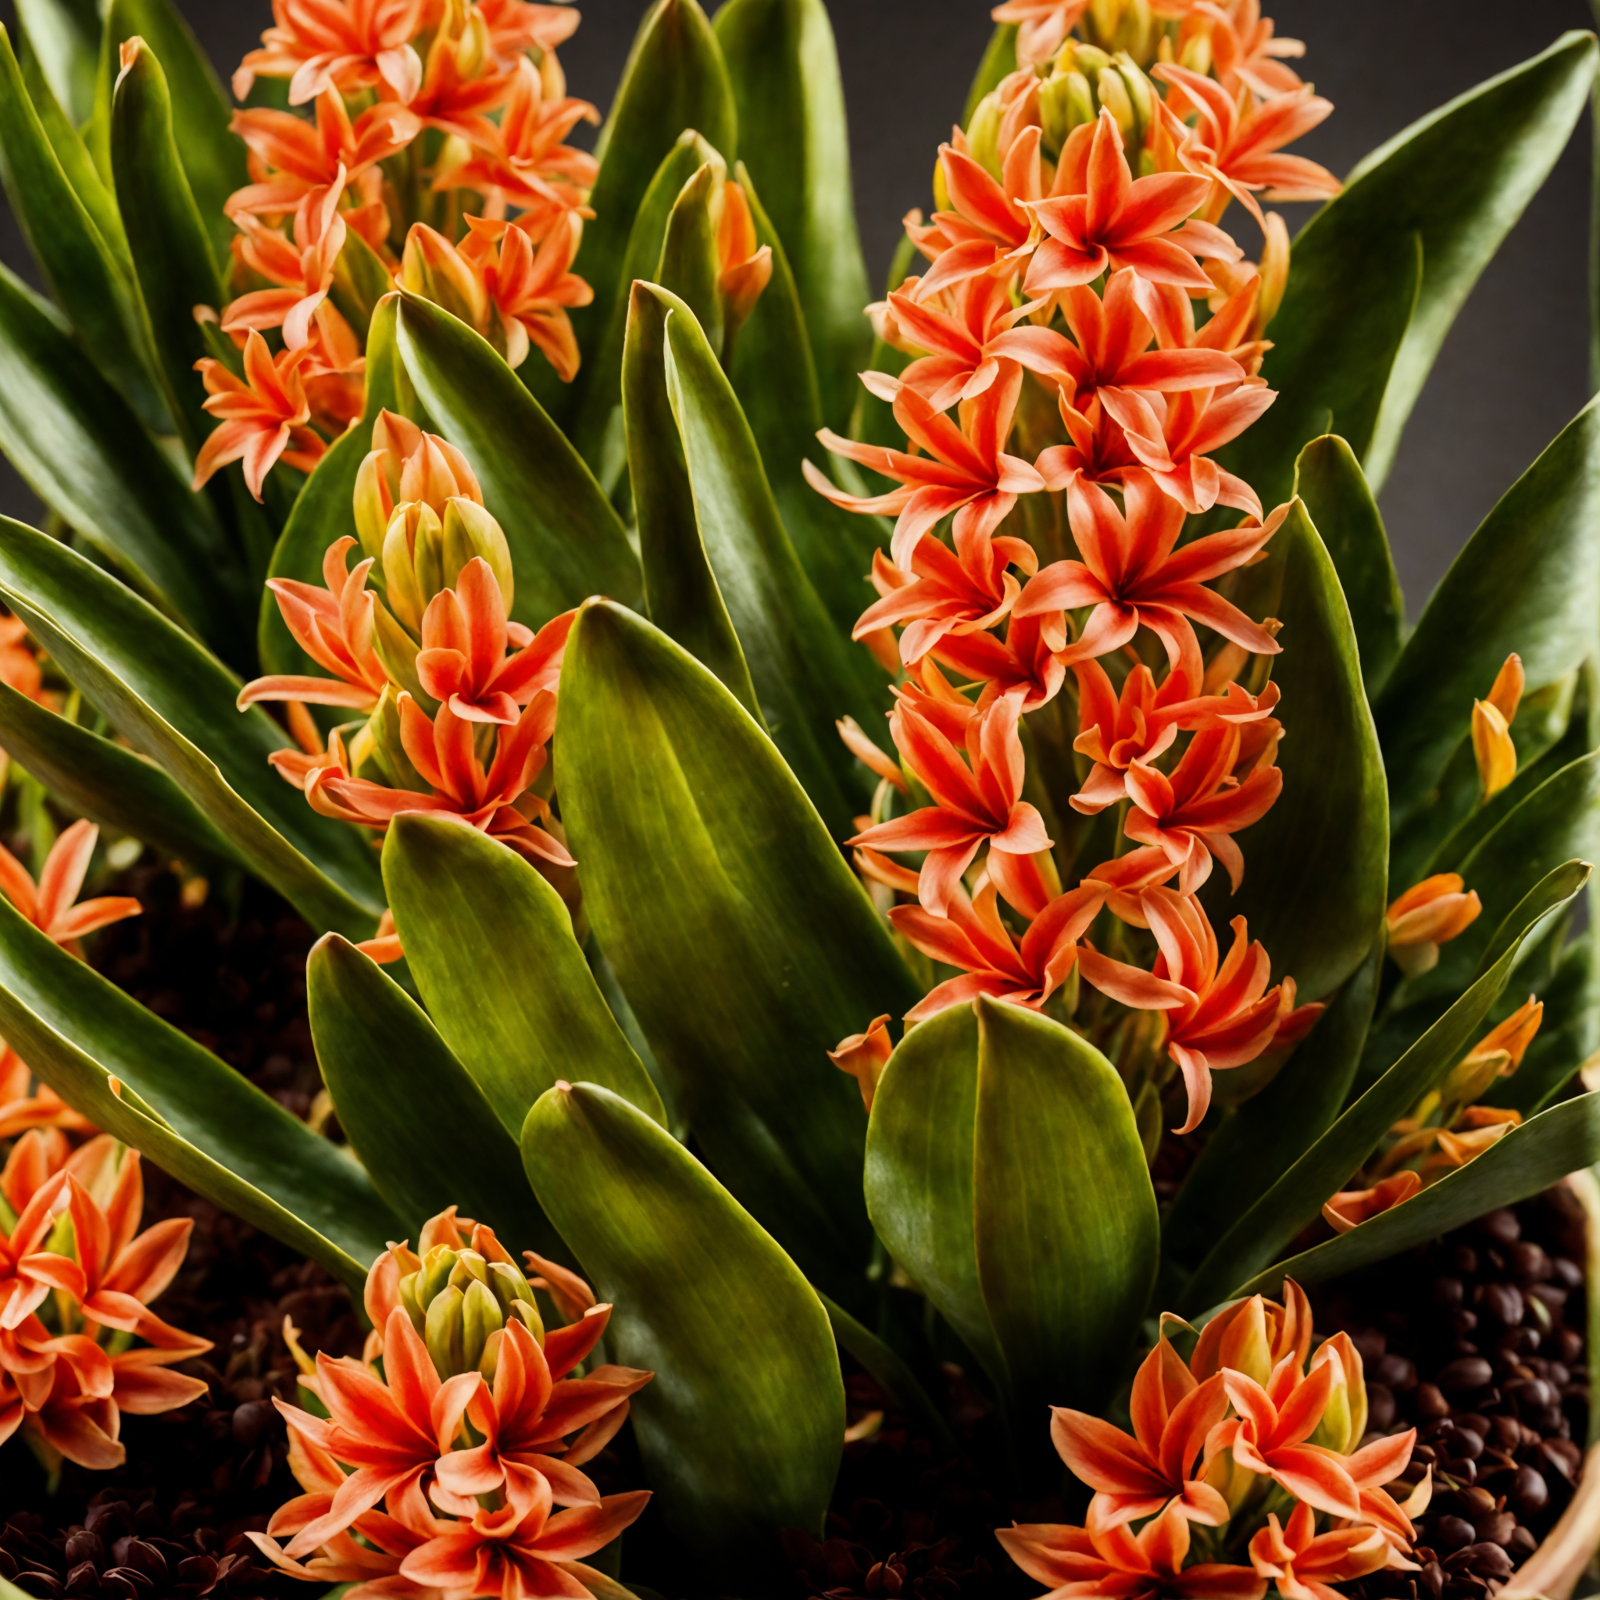 Vibrant red and yellow Hyacinthus orientalis flowers in a planter with clear, neutral lighting.